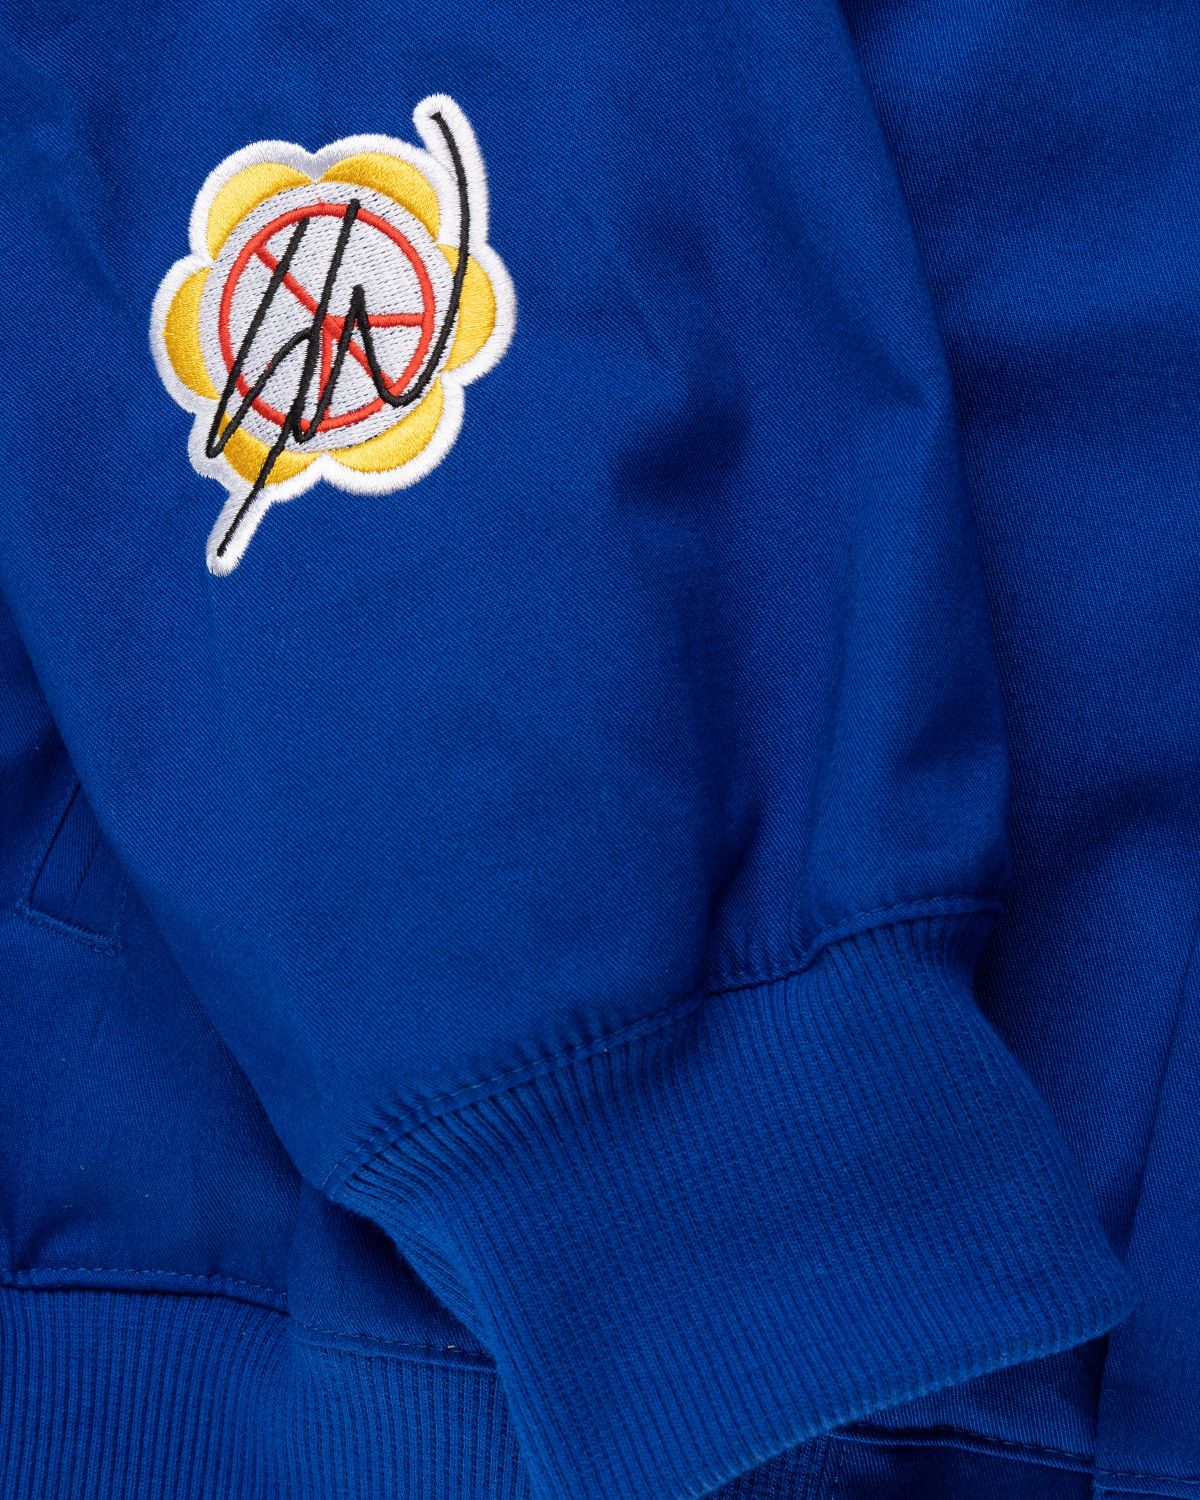 Adidas – Sean Wotherspoon x Hot Wheels Race Jacket Blue - Jackets - Blue - Image 4